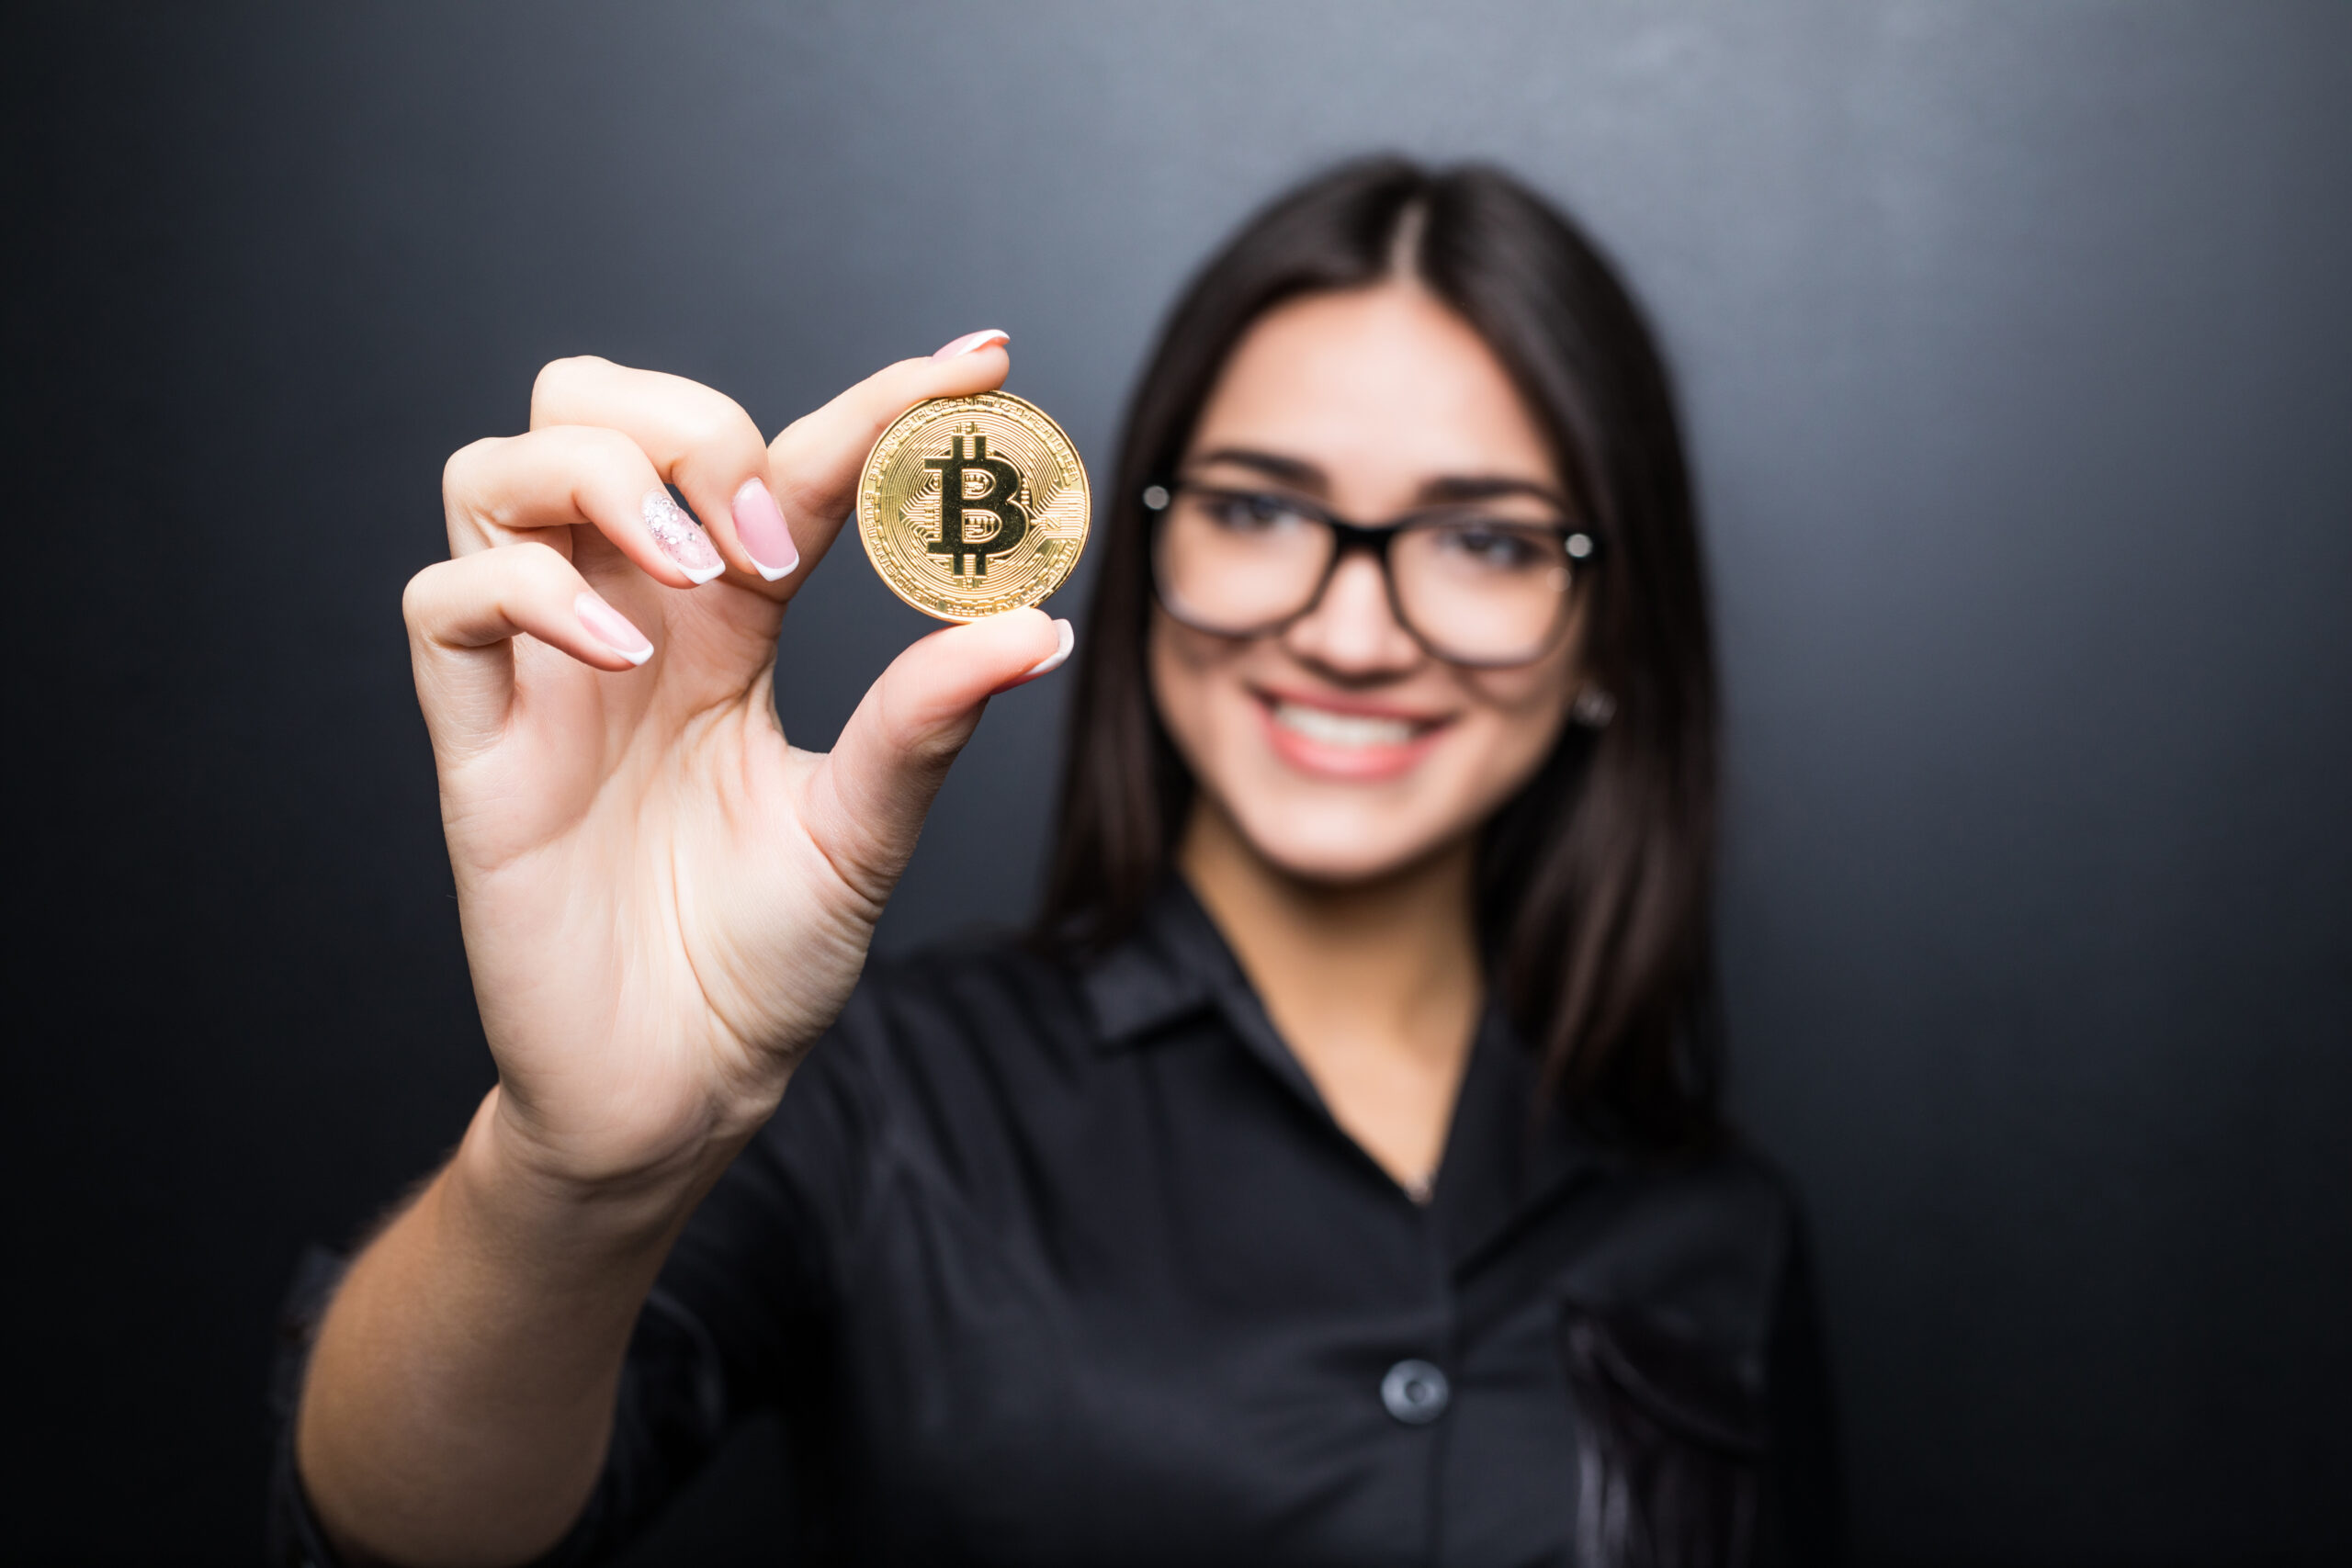 https://publiconline.com.br/wp-content/uploads/2022/06/young-successful-confident-woman-with-glasses-holds-a-gold-bitcoin-in-her-hand-isolated-on-black-wall-scaled.jpg